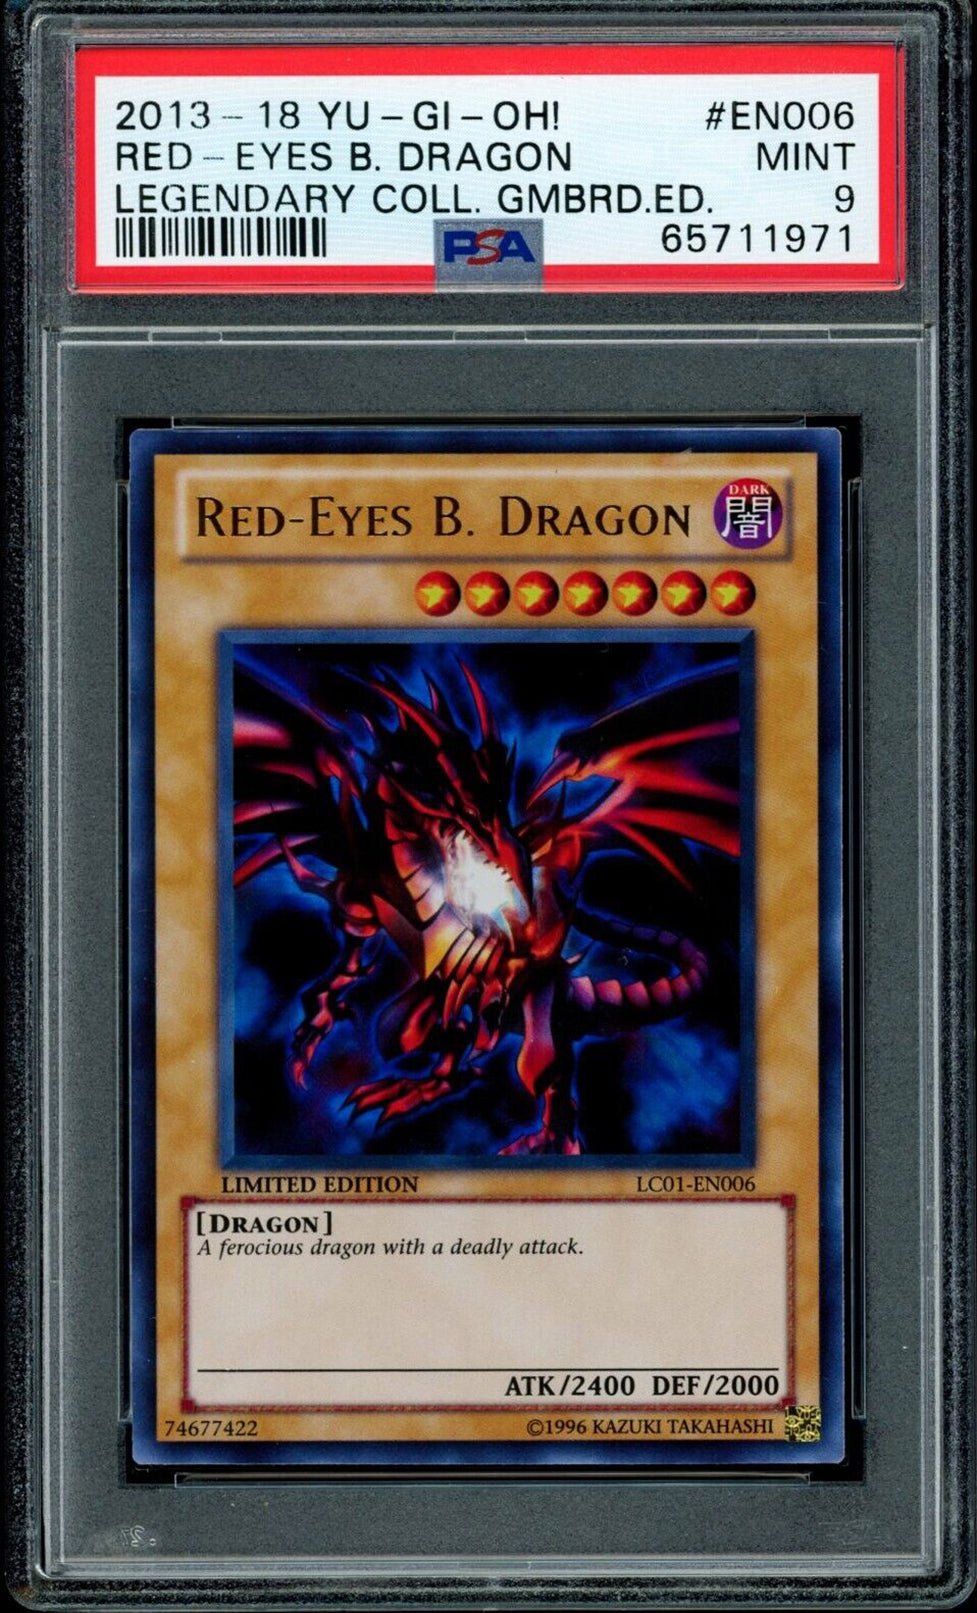 RED-EYES B DRAGON LC01-EN006 Ultra Rare PSA 9 2013-18 Legendary Collection Gameboard Edition C2 Yu-Gi-Oh Base Graded Cards - Hobby Gems